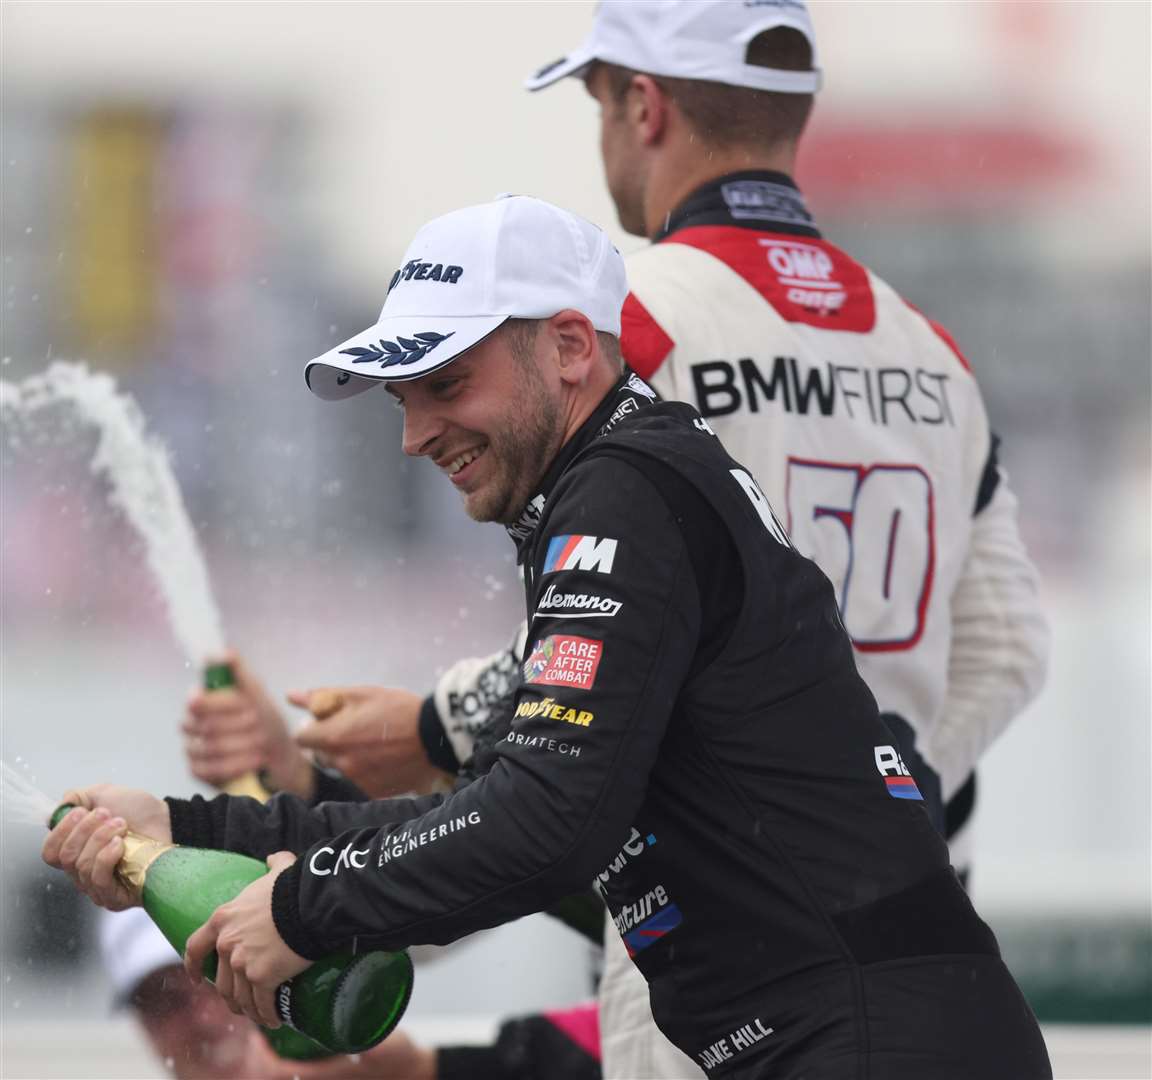 Jake Hill celebrates his second place in the BTCC at Brands. Picture: Jakob Ebrey